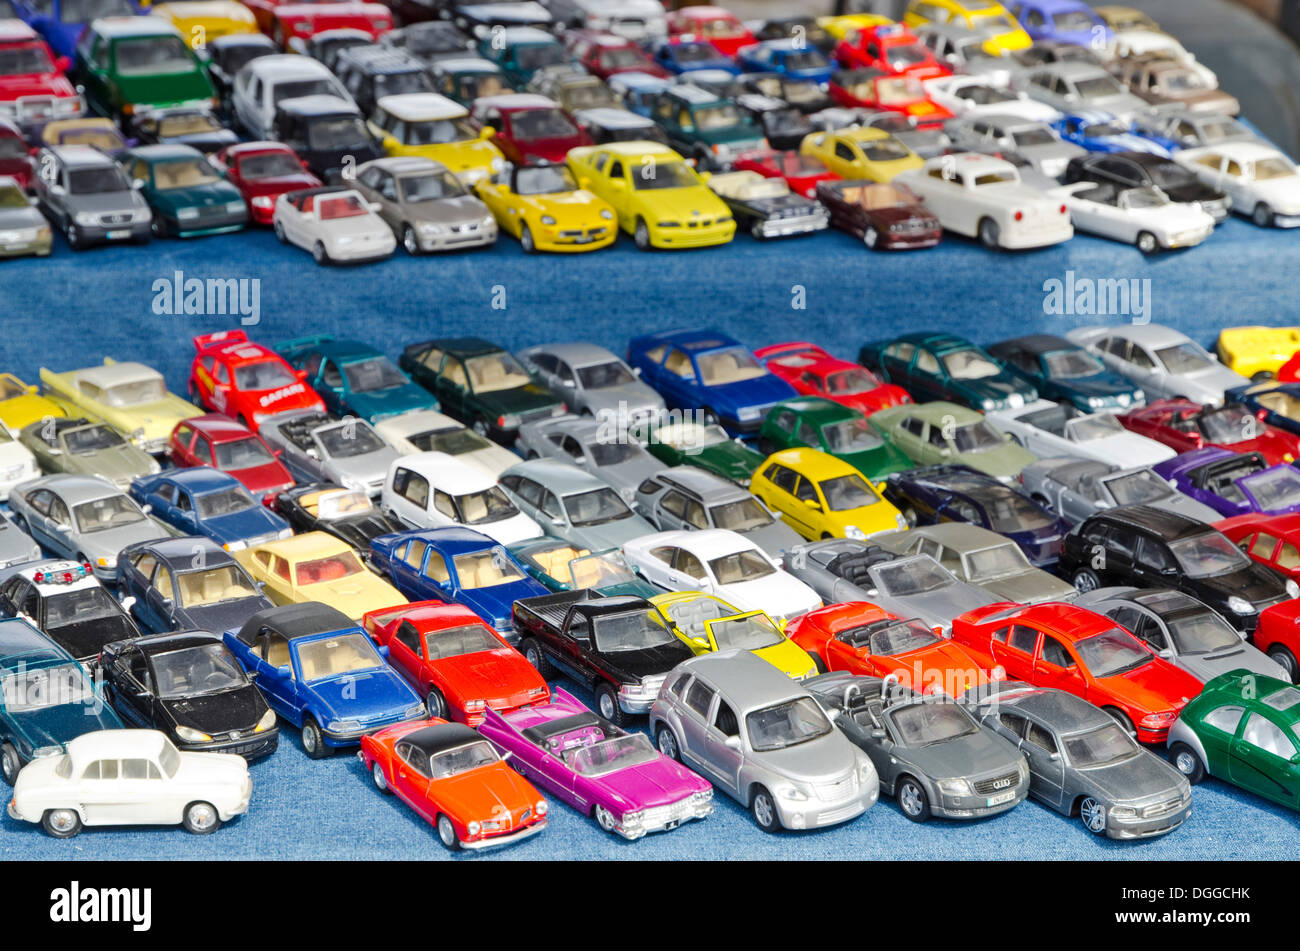 Toy cars are offered for sale at the weekly flea market, Dresden, Saxony Stock Photo